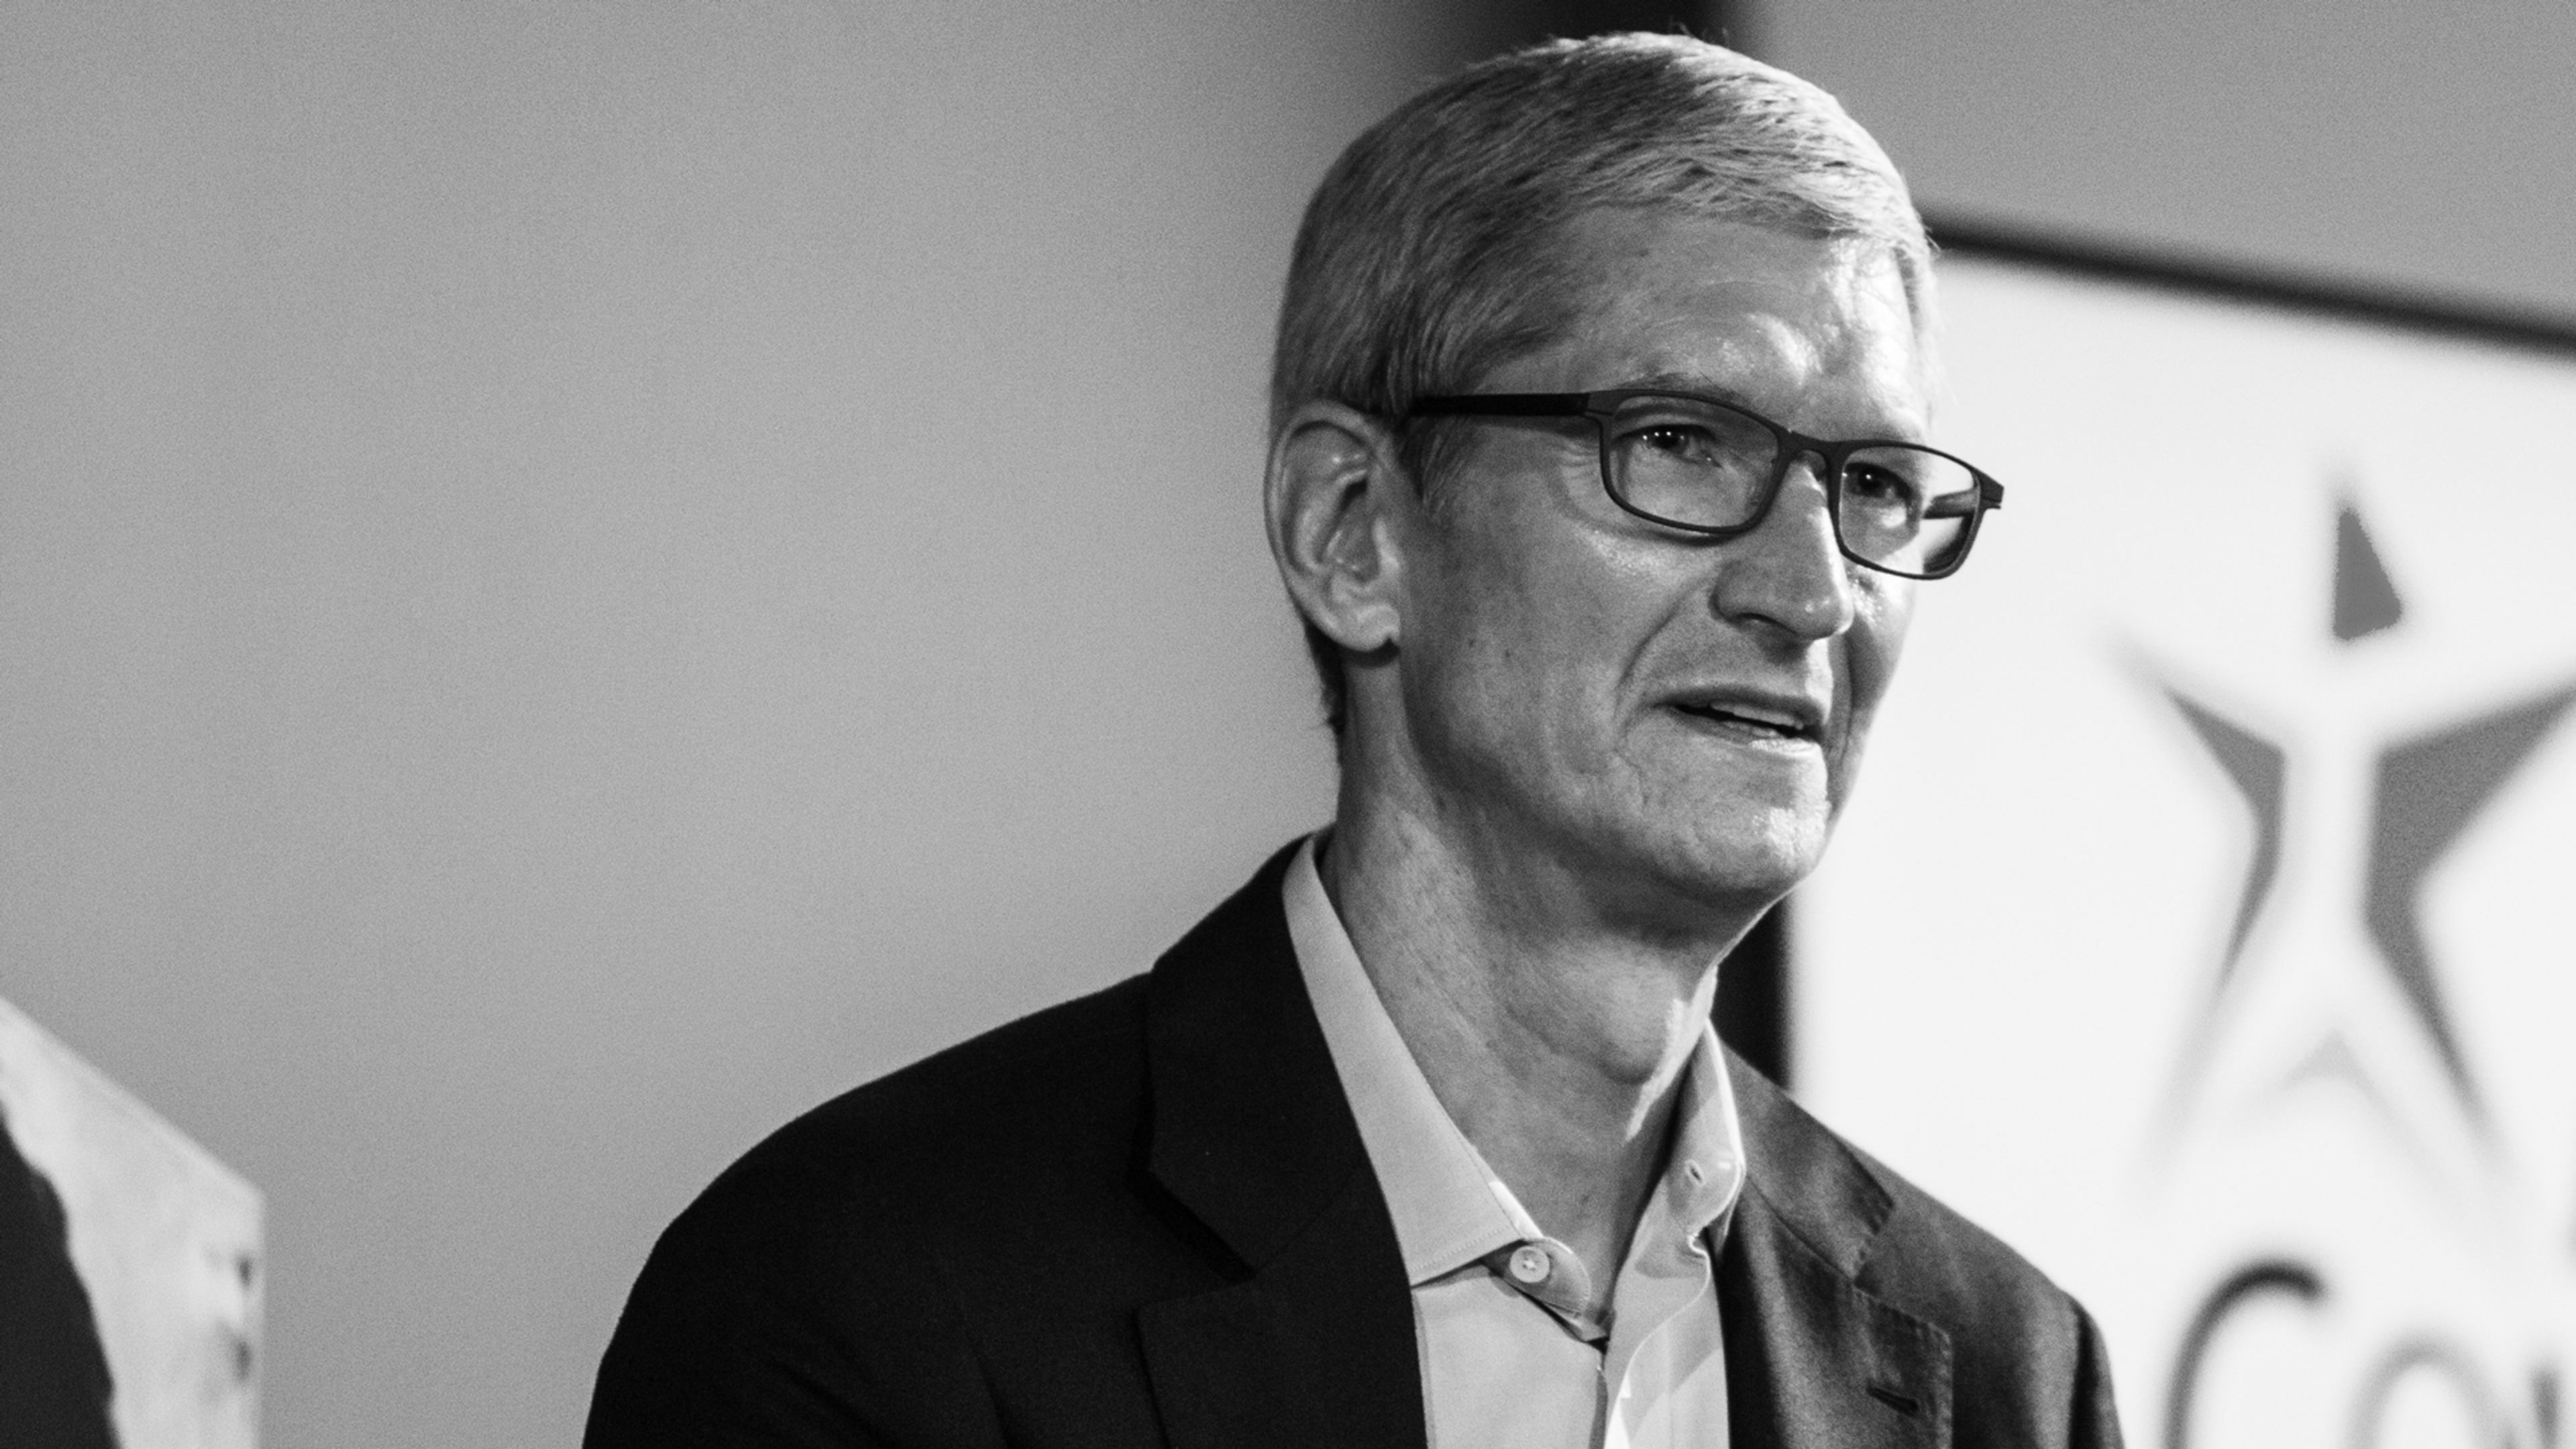 Tim Cook: “If you’re looking at a phone more than someone’s eyes, you’re doing the wrong thing”